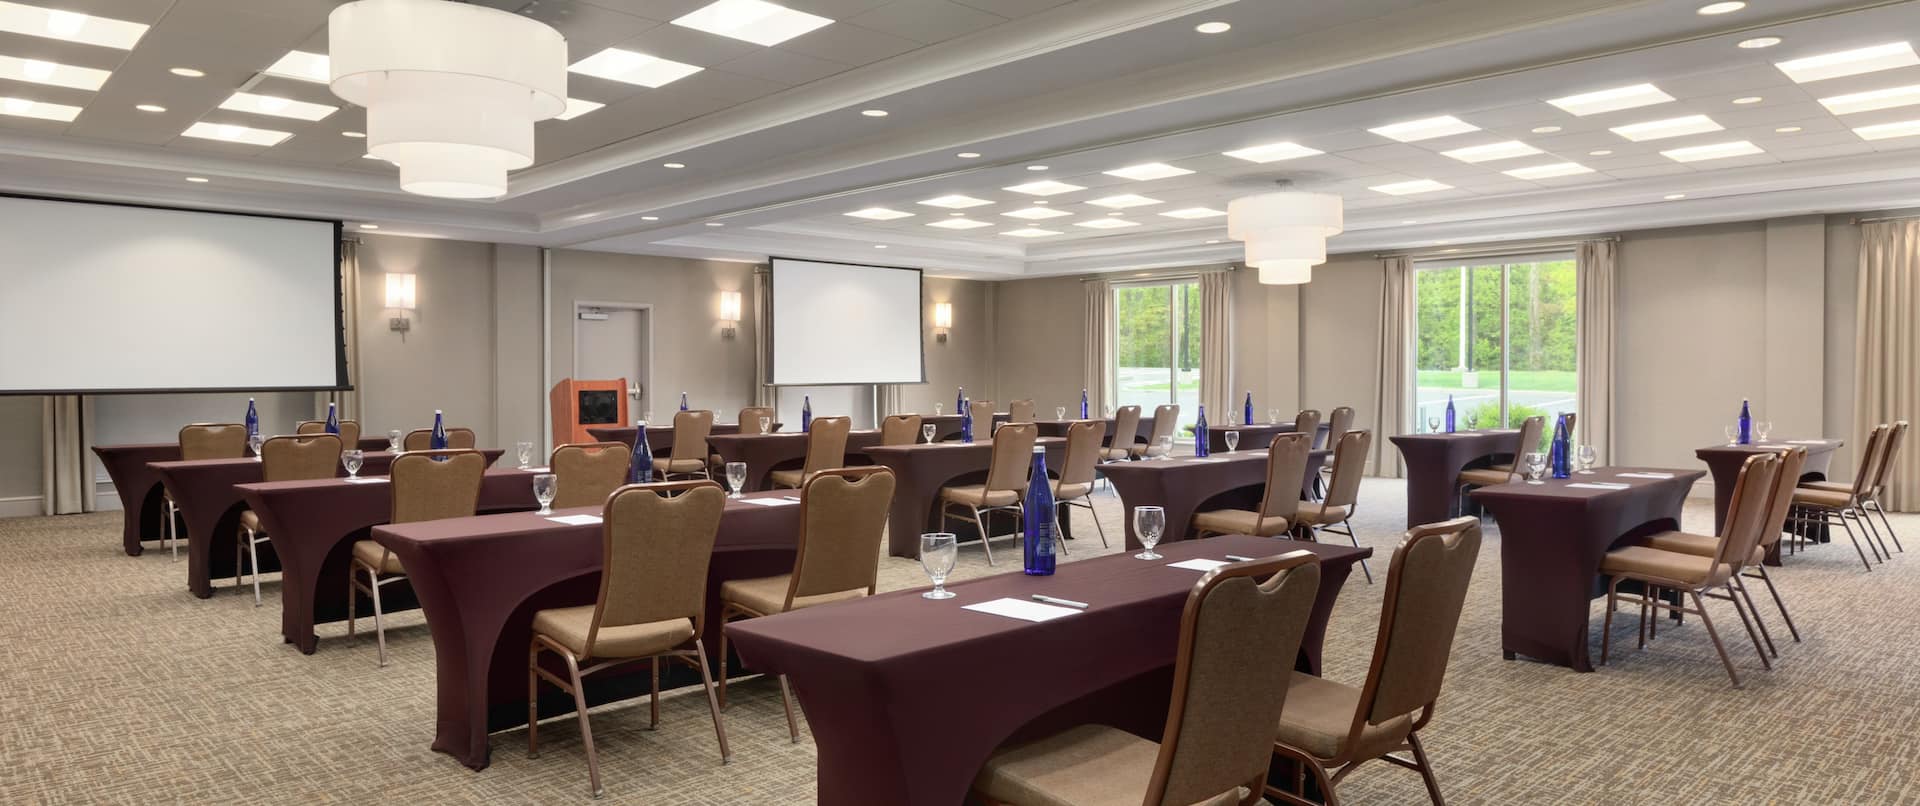 Spacious combined meeting room space featuring classroom style tables, large windows, and dual projector screens at front of room.